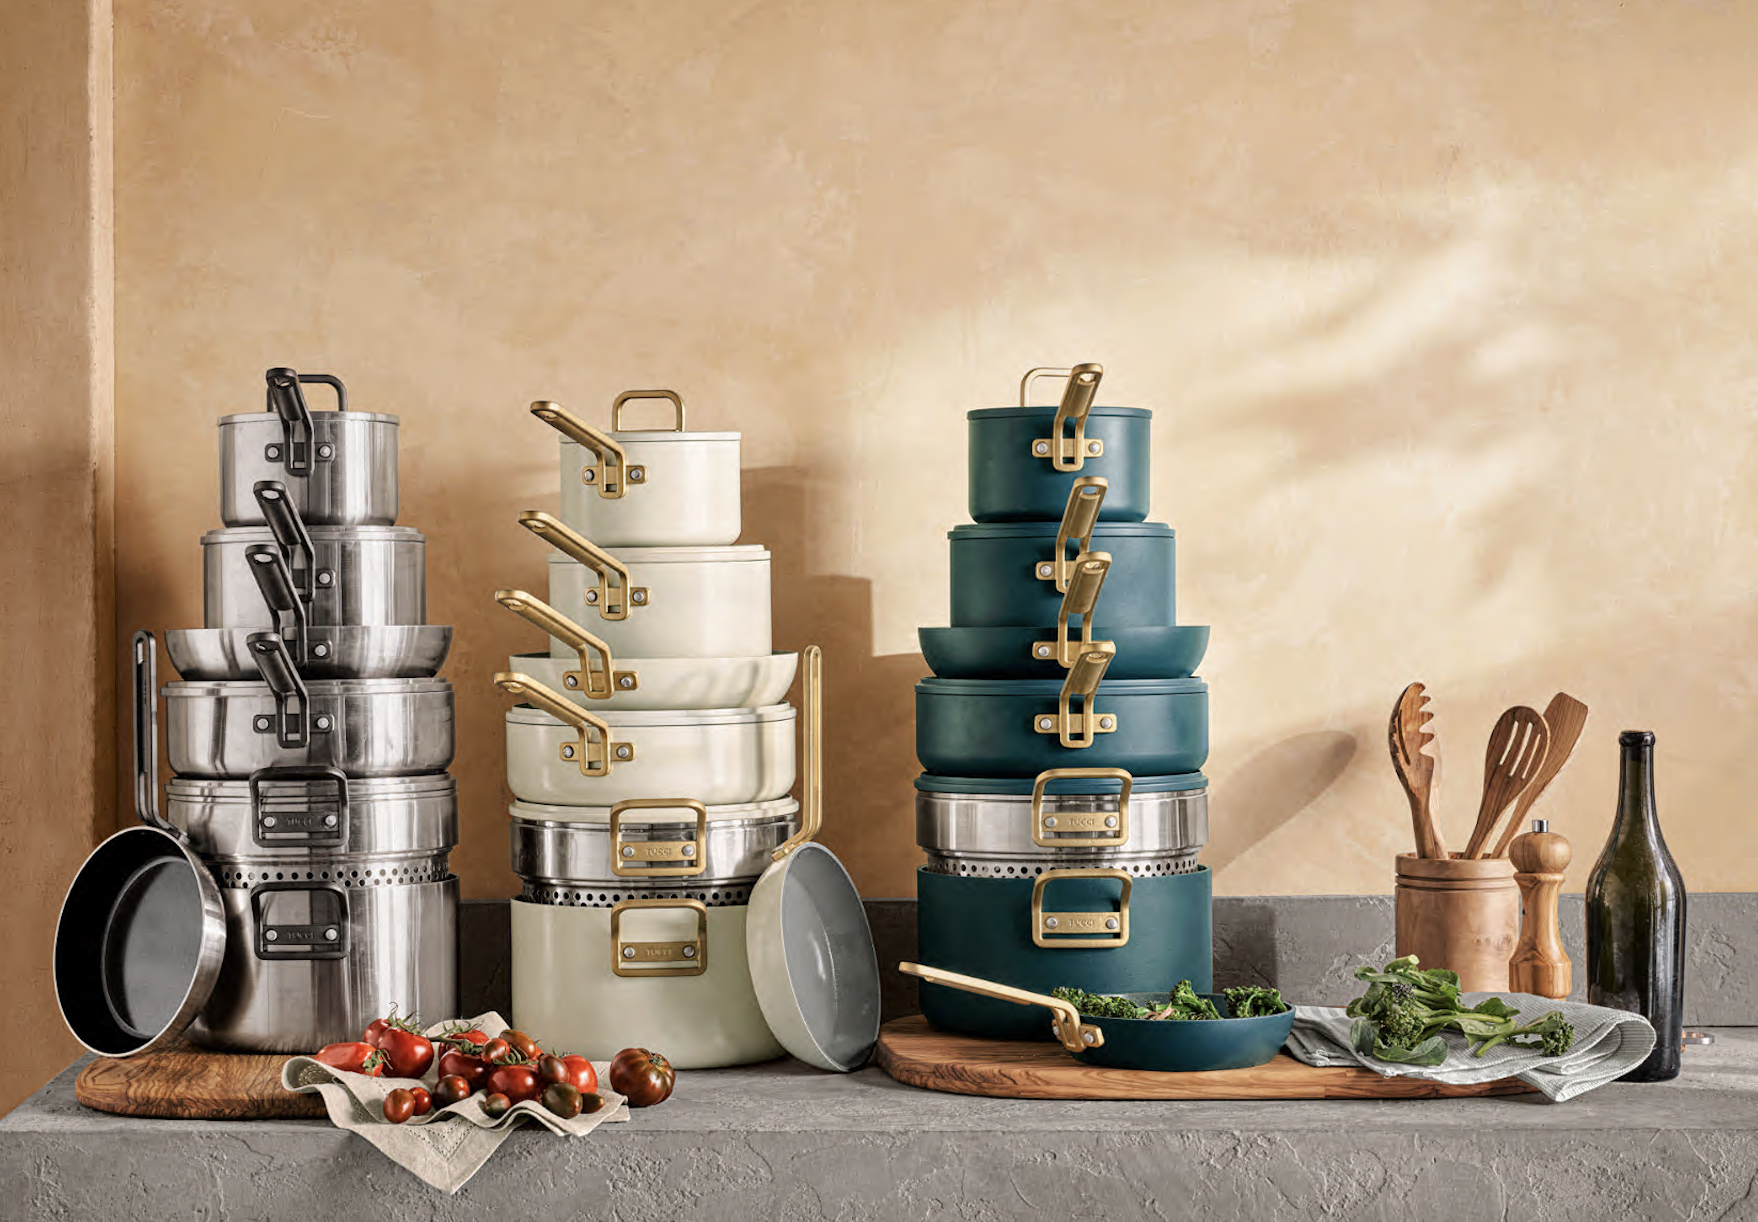 EatingWell Just Launched a New Cookware Collection on HSN